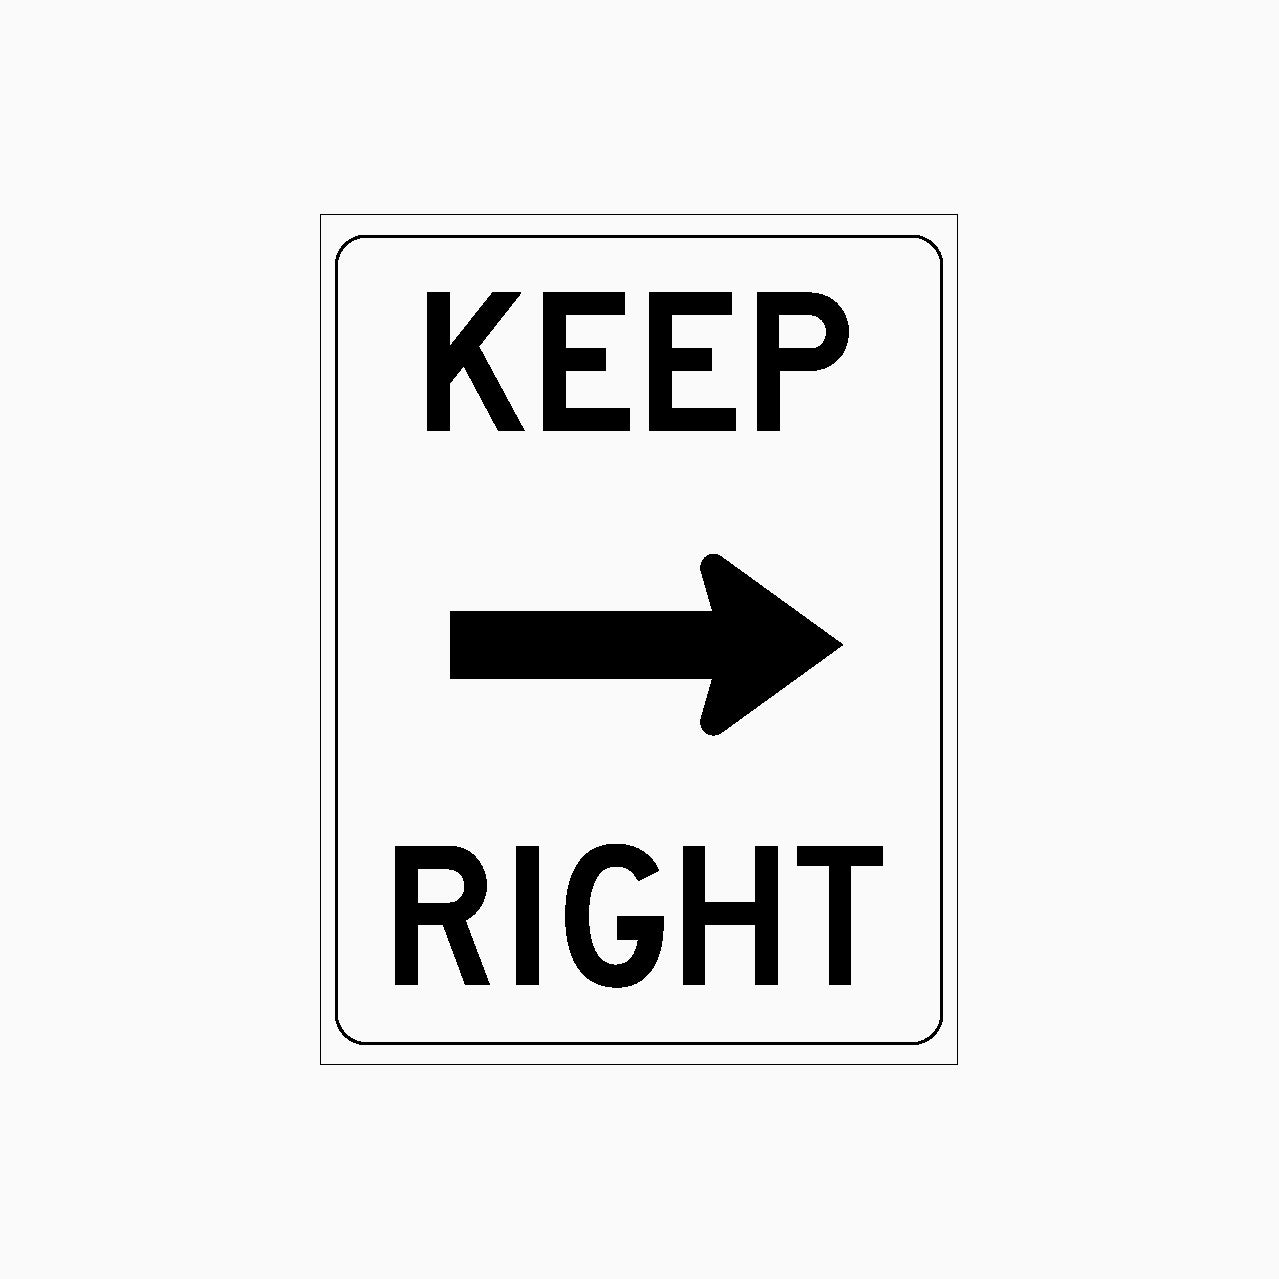 KEEP RIGHT SIGN (TRAFFIC SIGN) 